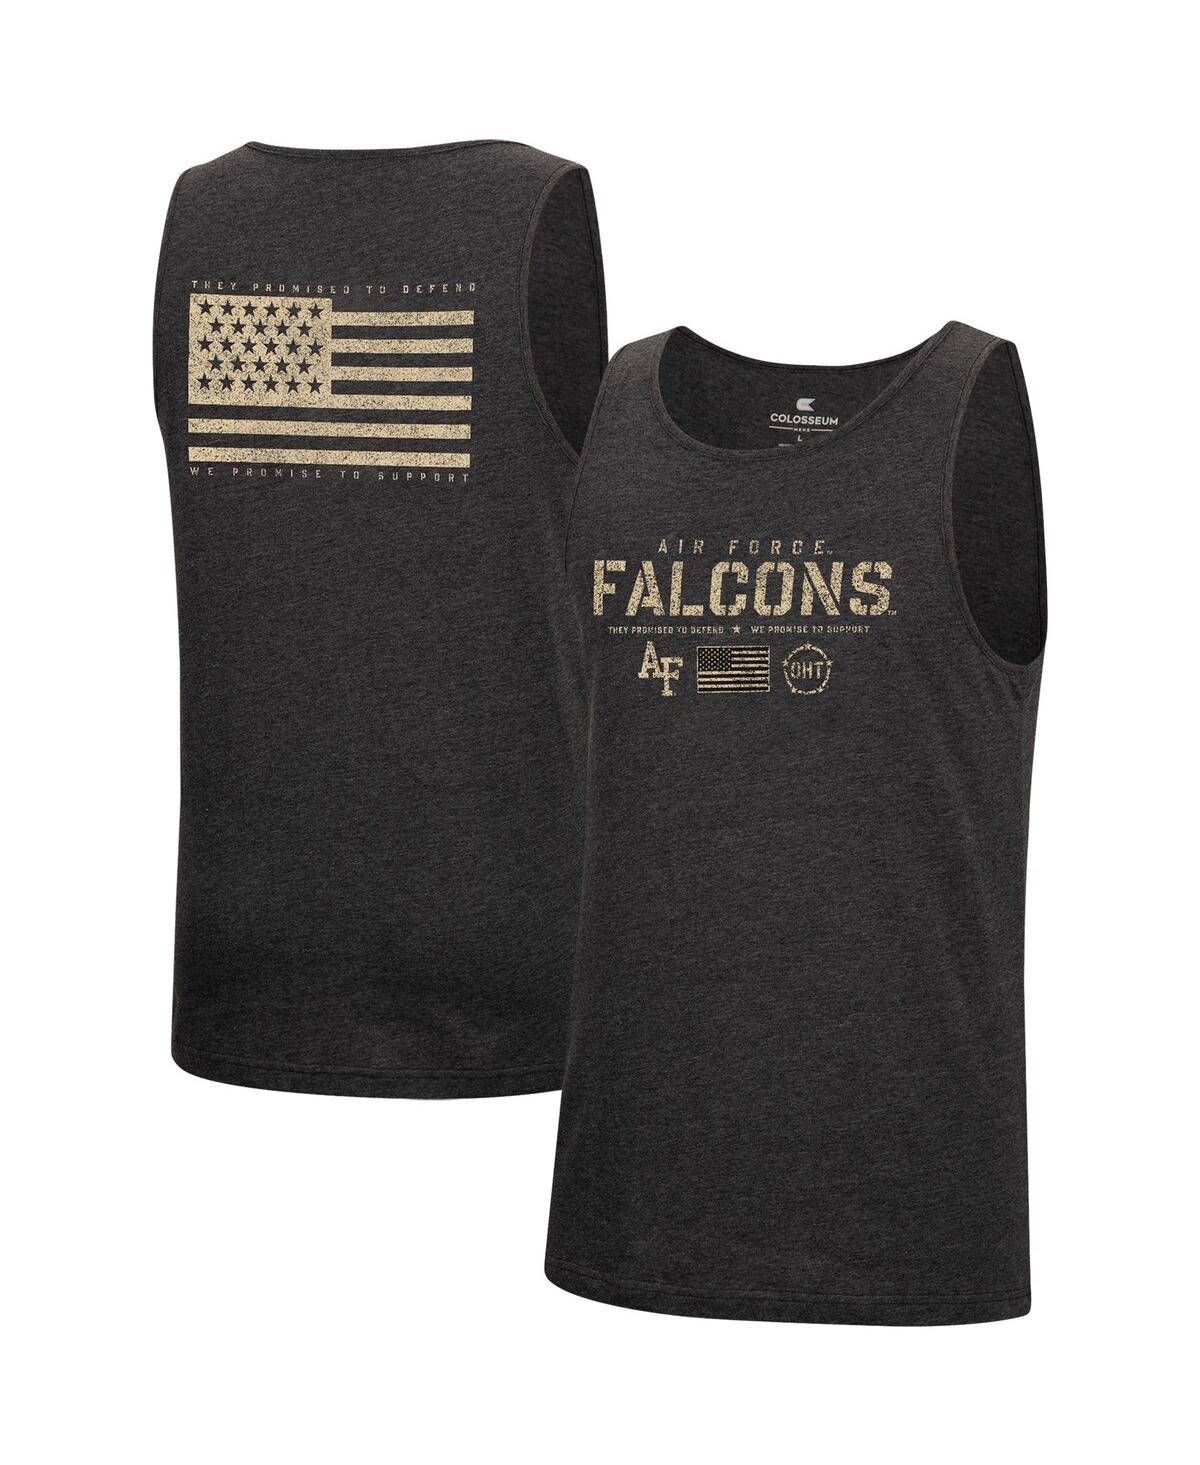 Men's Colosseum Heathered Black Air Force Falcons Military-Inspired Appreciation Oht Transport Tank Top - Heathered Black